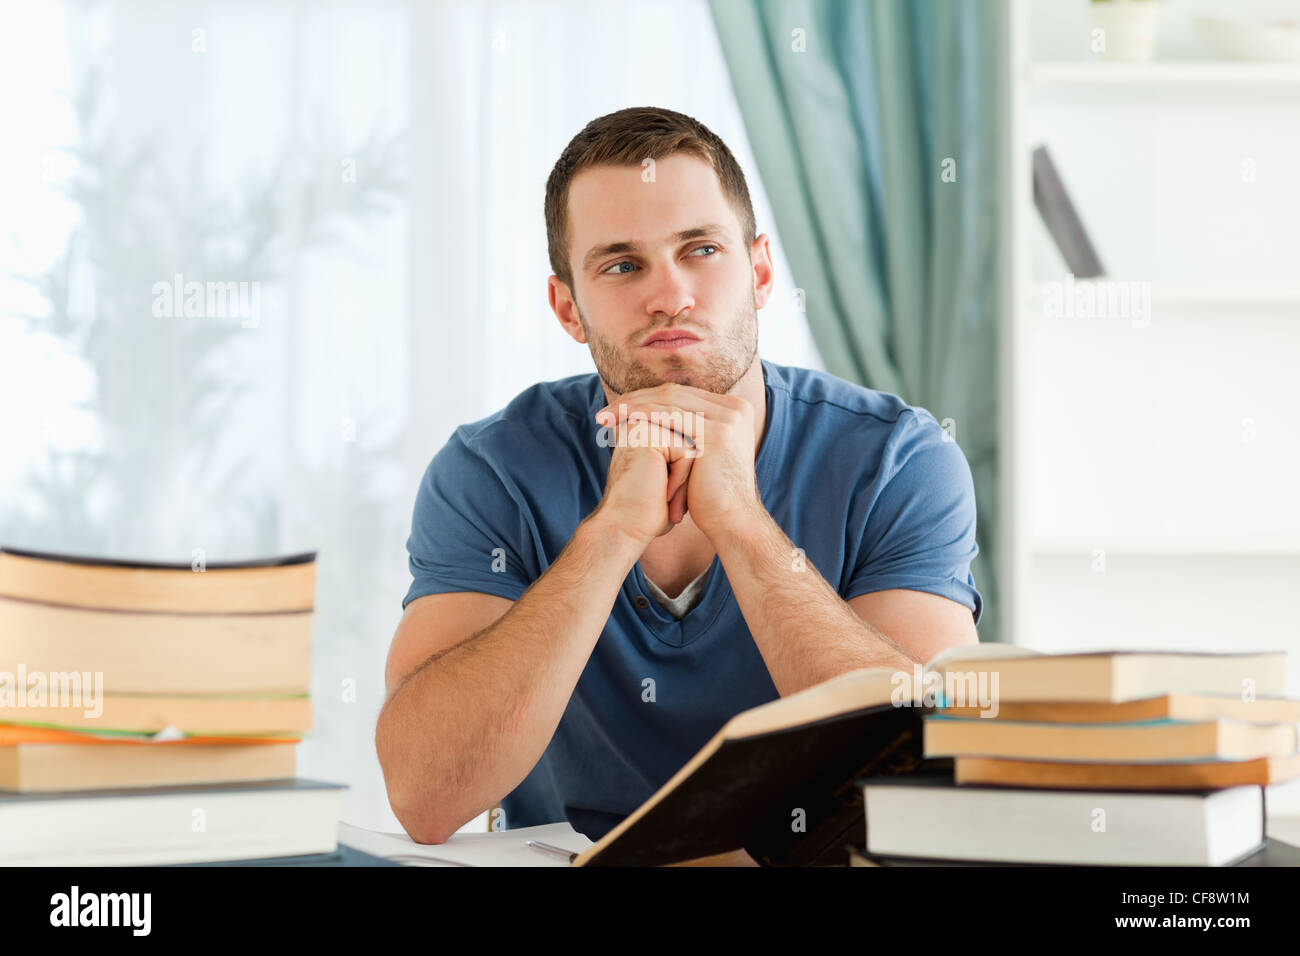 Student sitting at his desk in thoughts Stock Photo